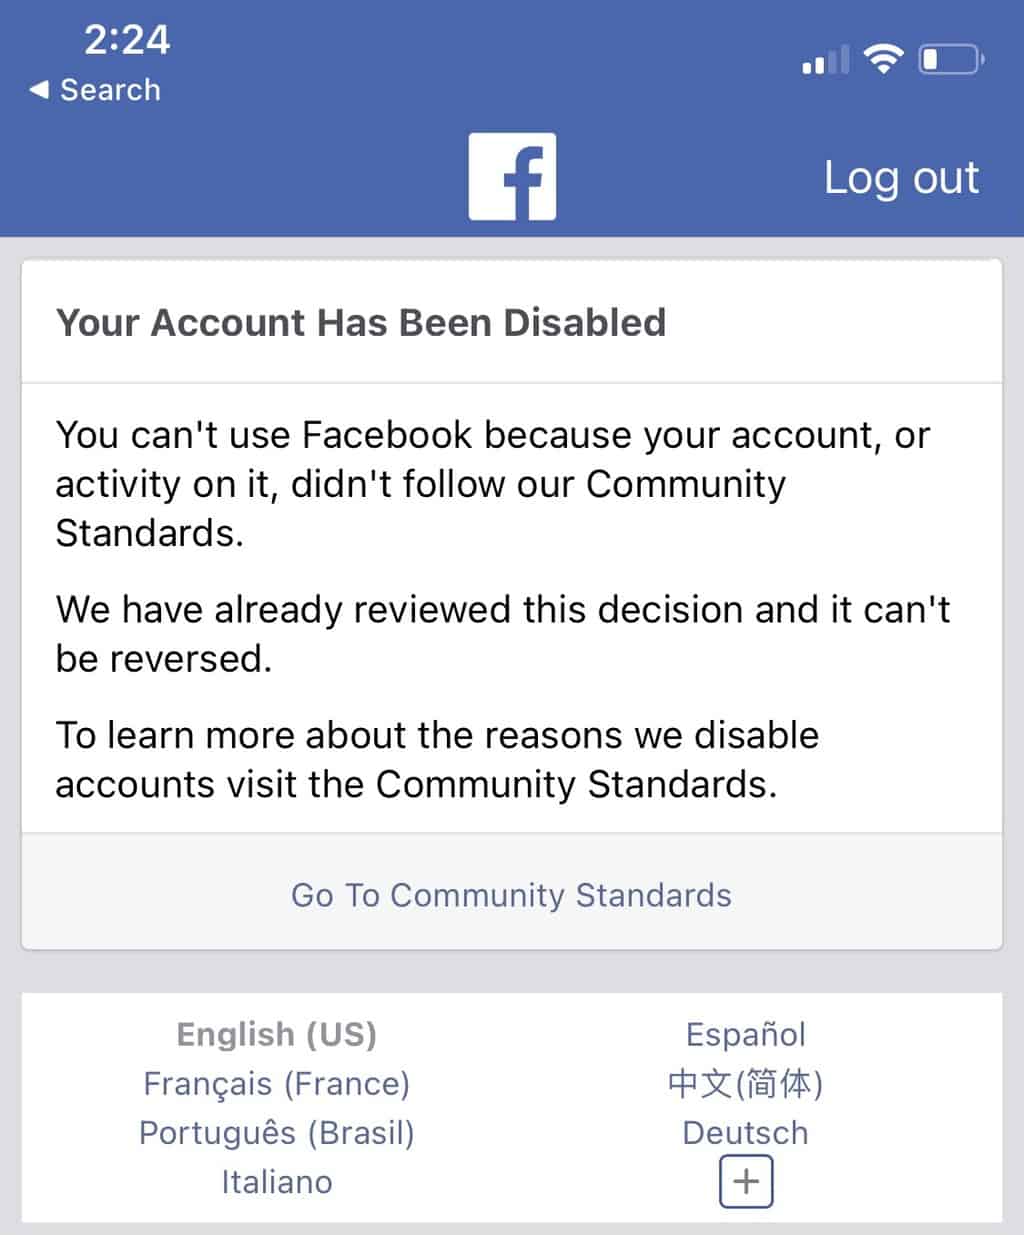 Facebook Disabled My Account After I was Hacked